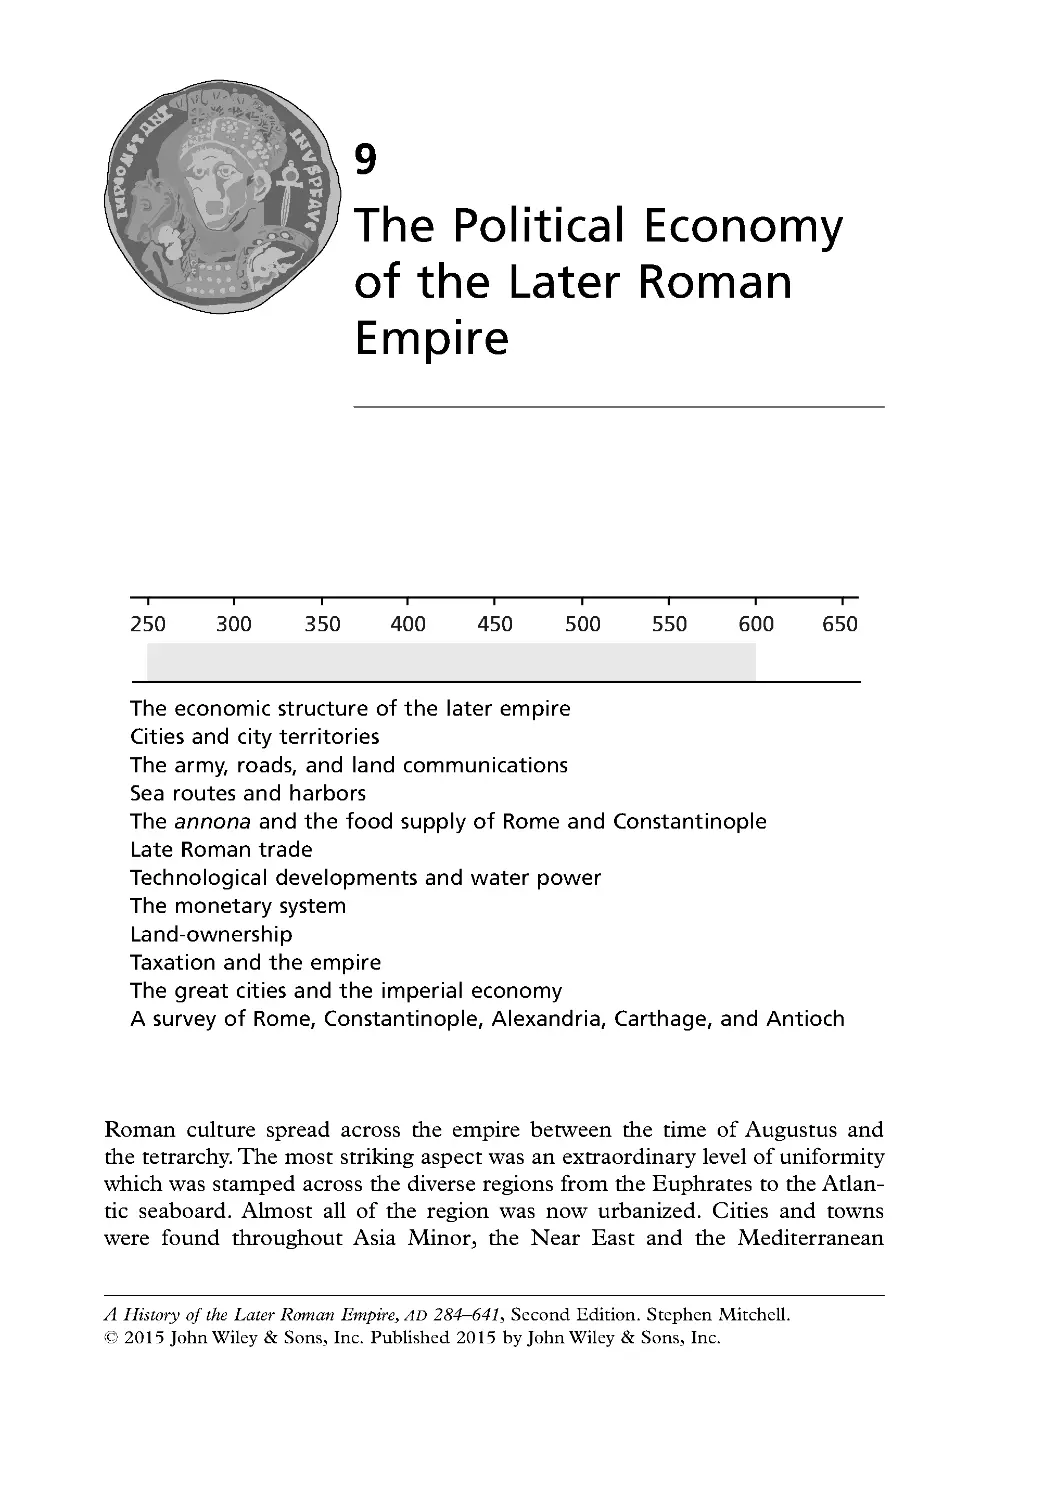 9: The Political Economy of the Later Roman Empire